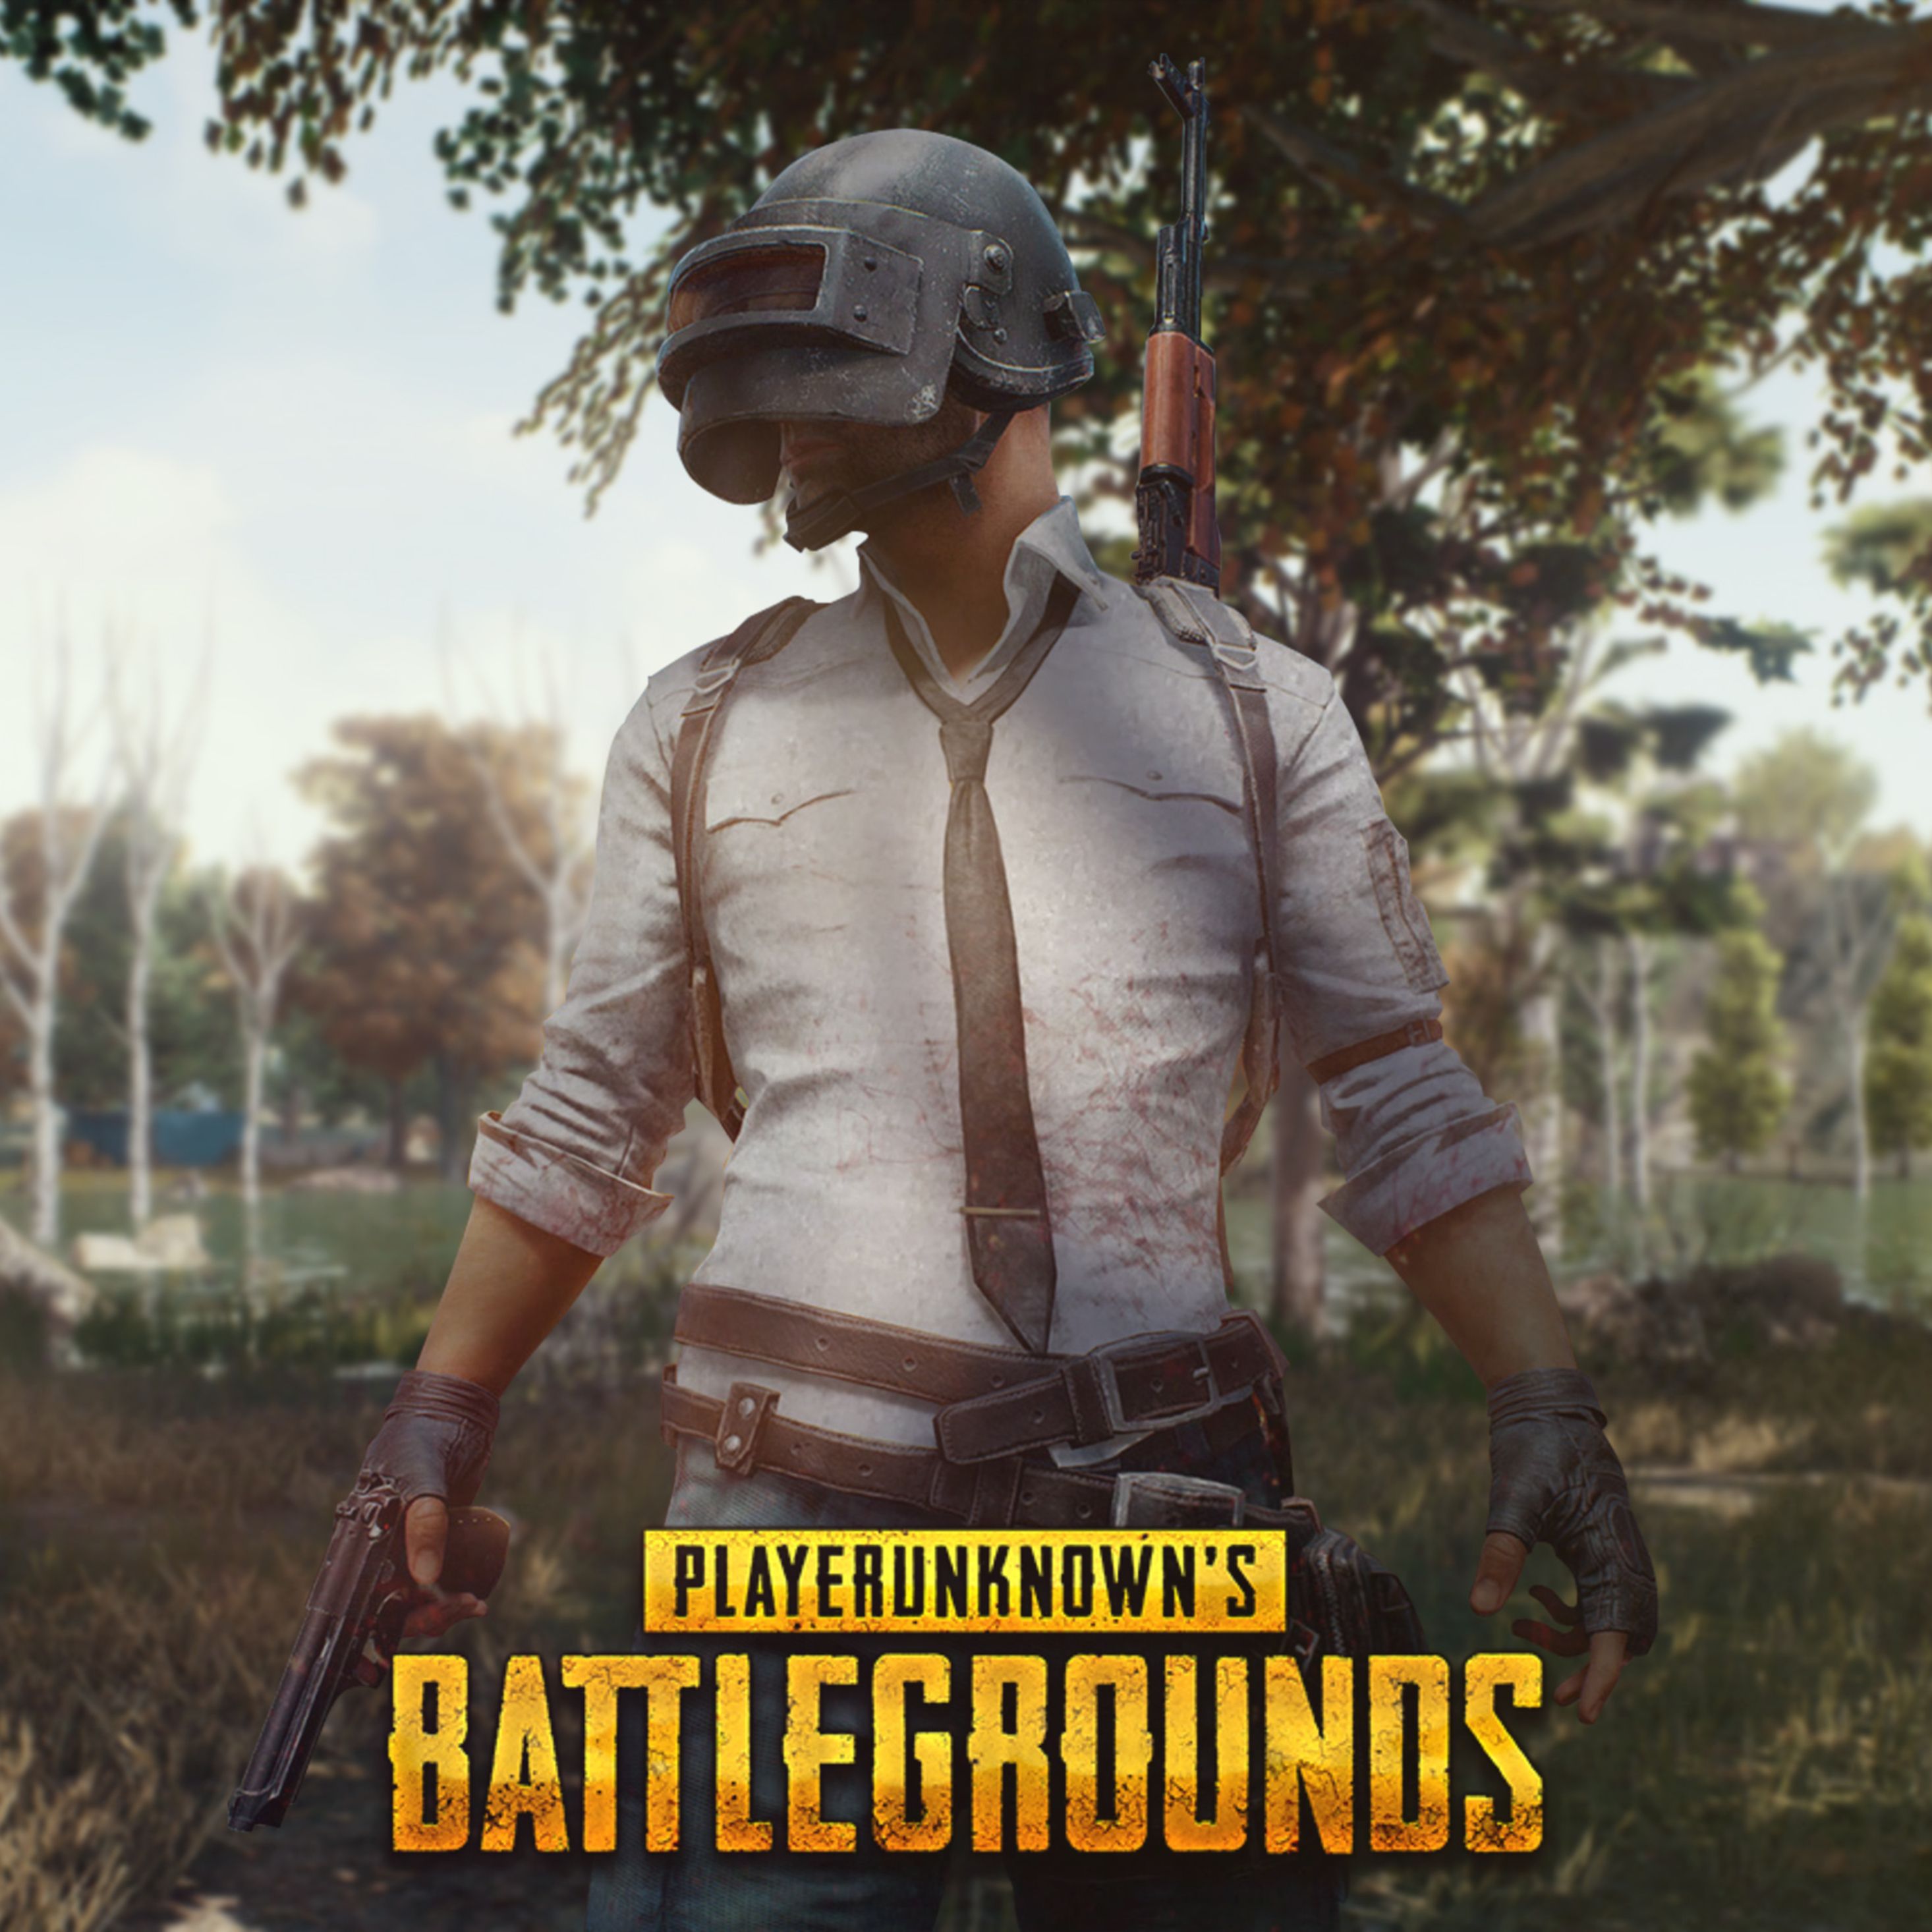 Pubg Mobile Helmet Guy iPad Pro Retina Display HD 4k Wallpaper, Image, Background, Photo and Picture